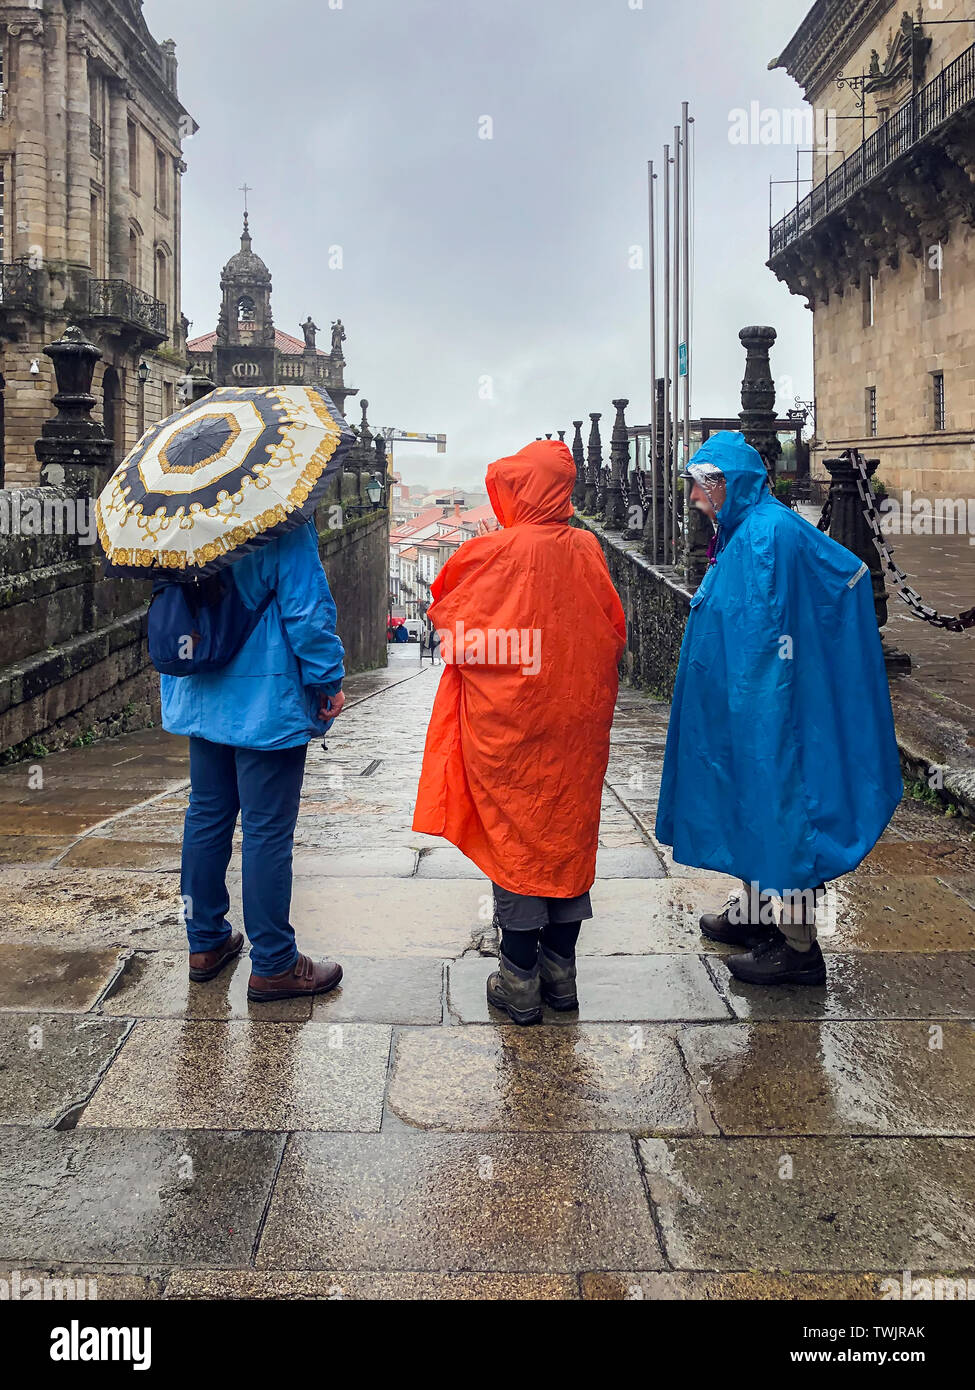 Three pilgrims back to us, with backpacks in colorful raincoats with an umbrellas standing in the historic square Stock Photo